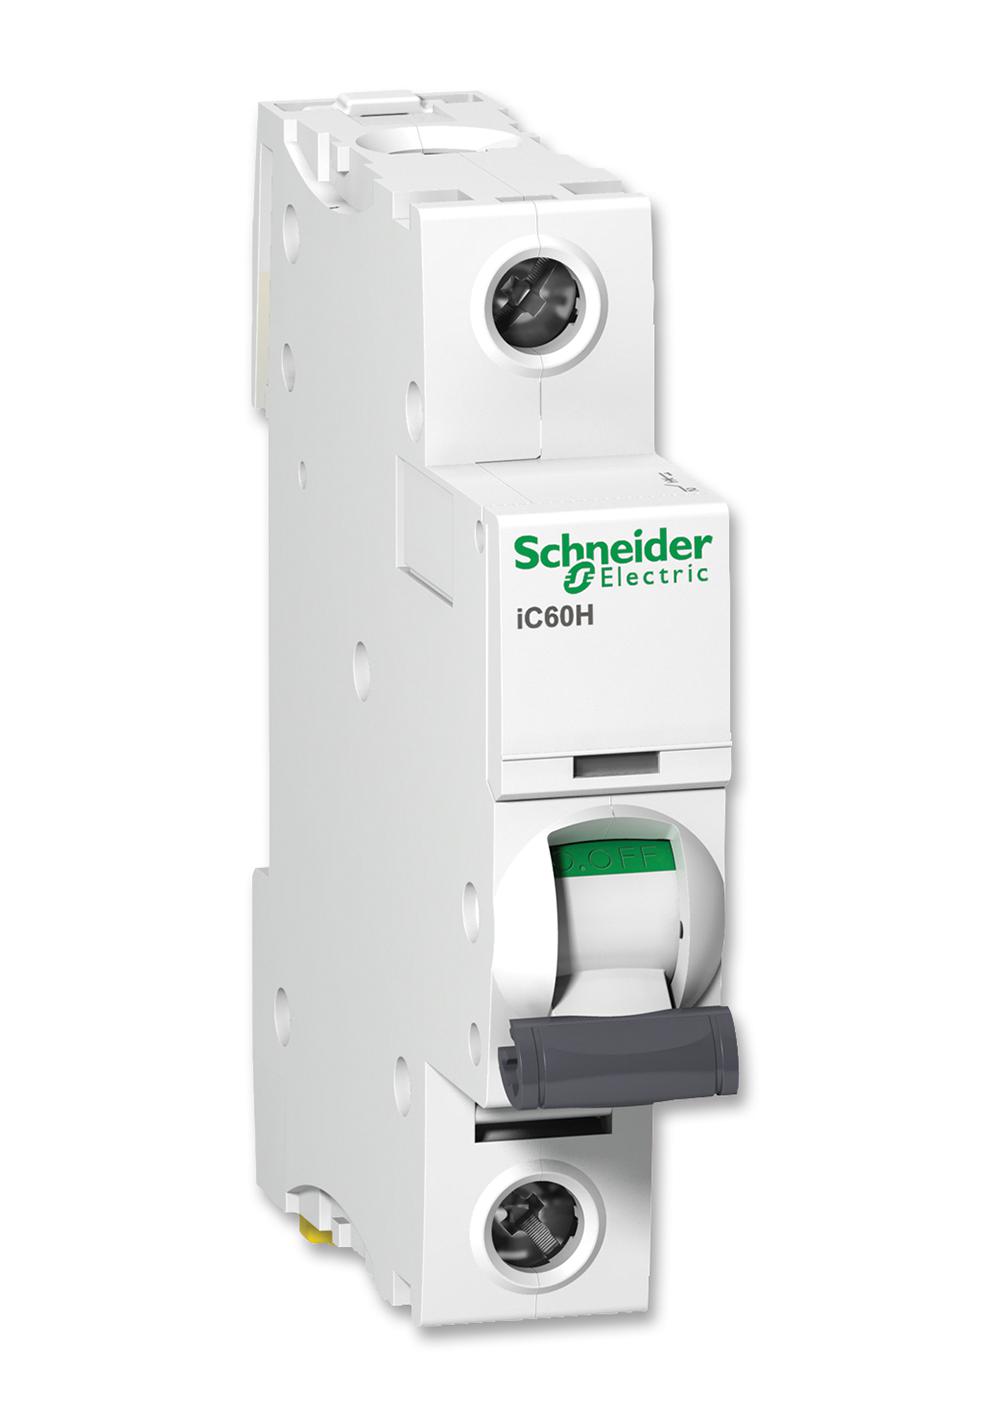 A9F54110 CIRCUIT BREAKER, THERMAL MAGNETIC, 1POLE SCHNEIDER ELECTRIC